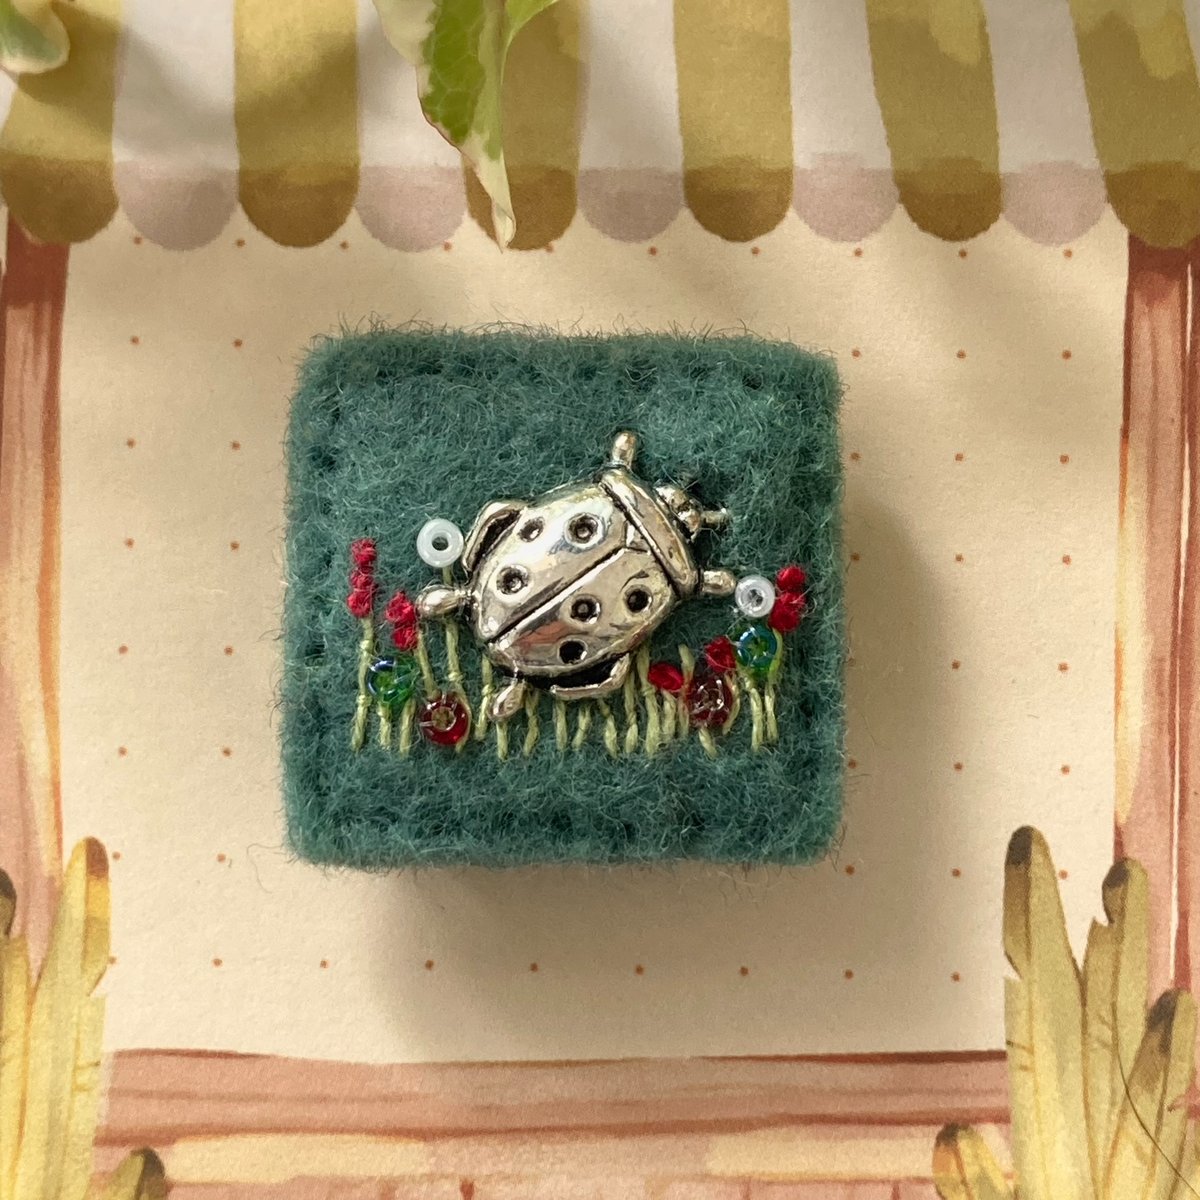 Summer themed #ladybird mini #brooch in moss green with tiny beads and hand stitching.

One of a kind #accessories hand sewn by #elliestreasures in #Lincolnshire.

elliestreasures.square.site/product/mini-l…

#handsewngifts #shopindie #summer #MHHSBD